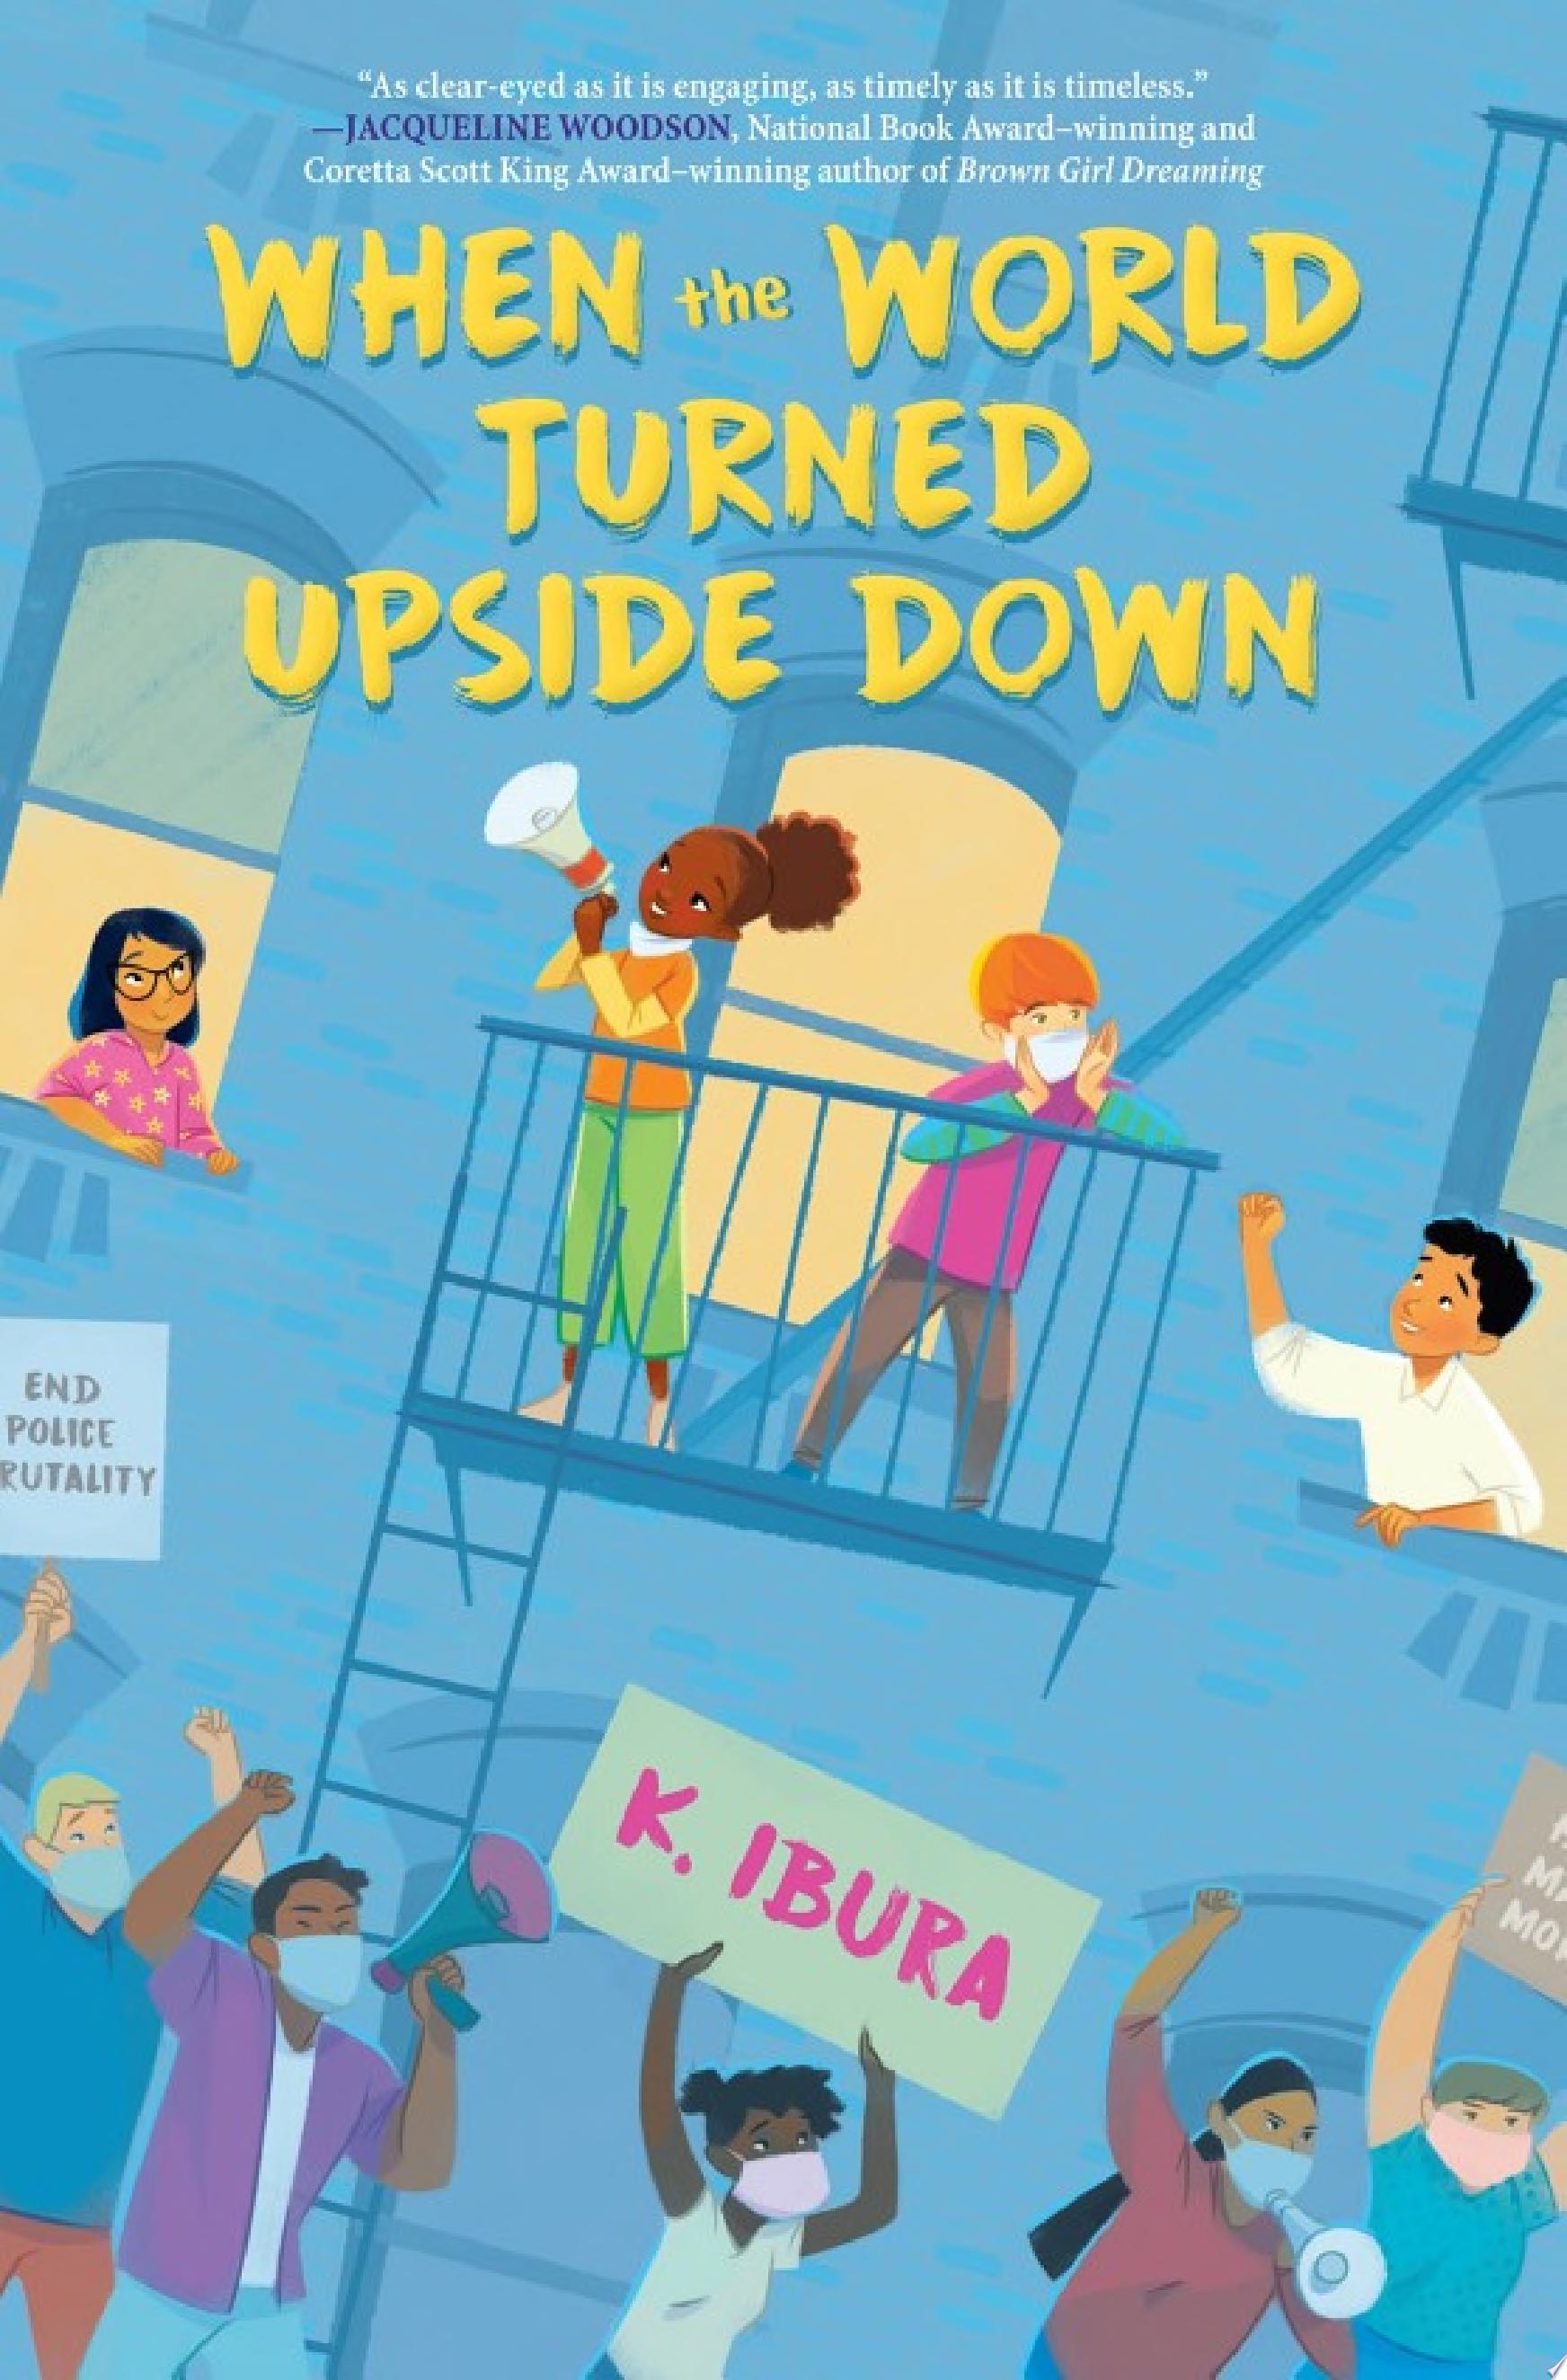 Image for "When the World Turned Upside Down"